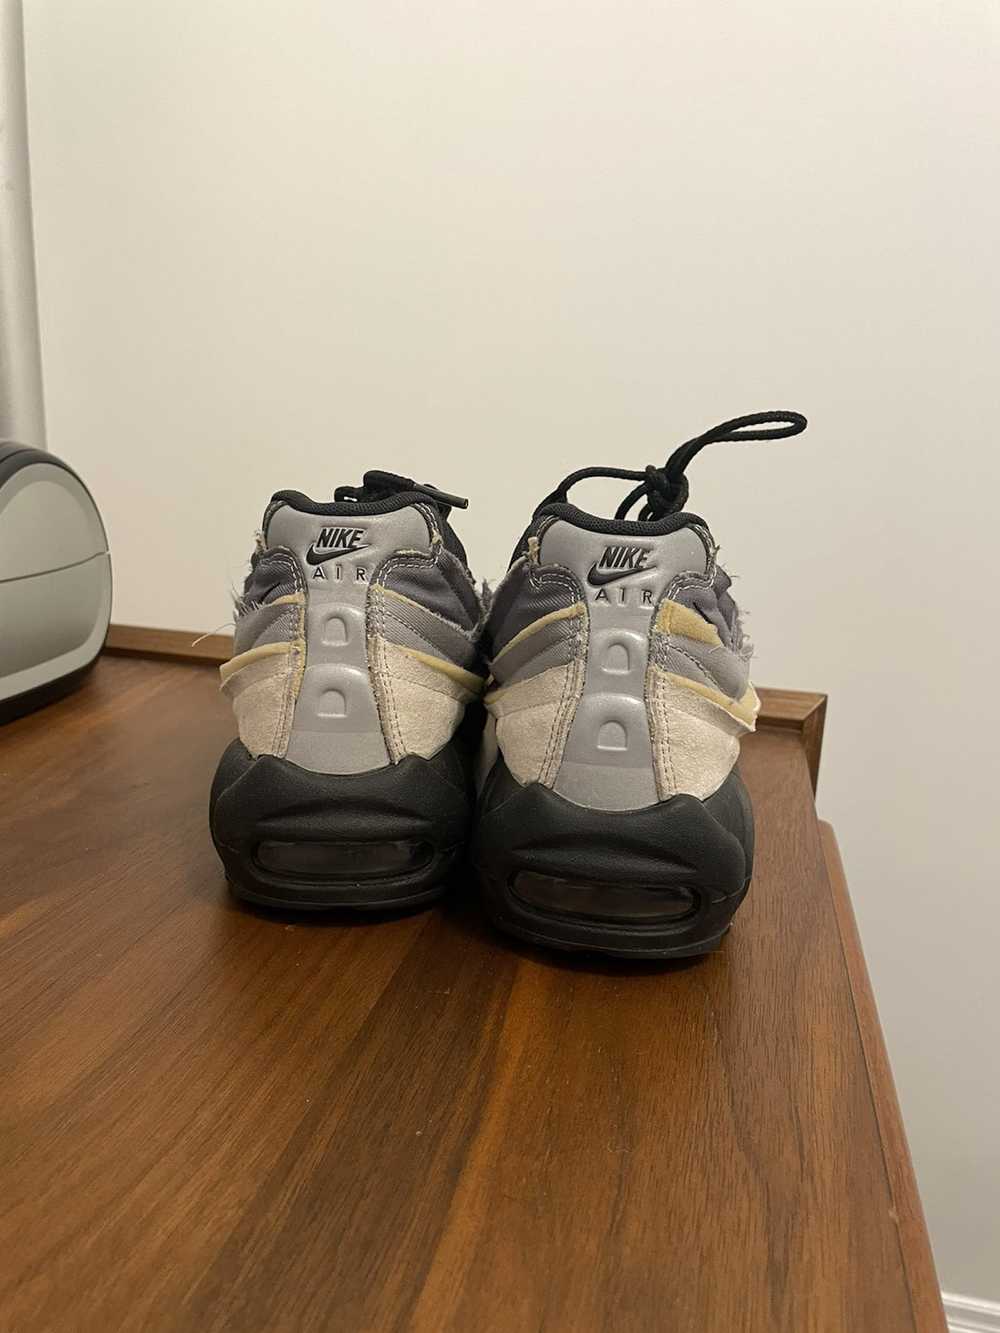 Comme des Garcons × Nike CDG Air Max 95 Charcoal - image 4